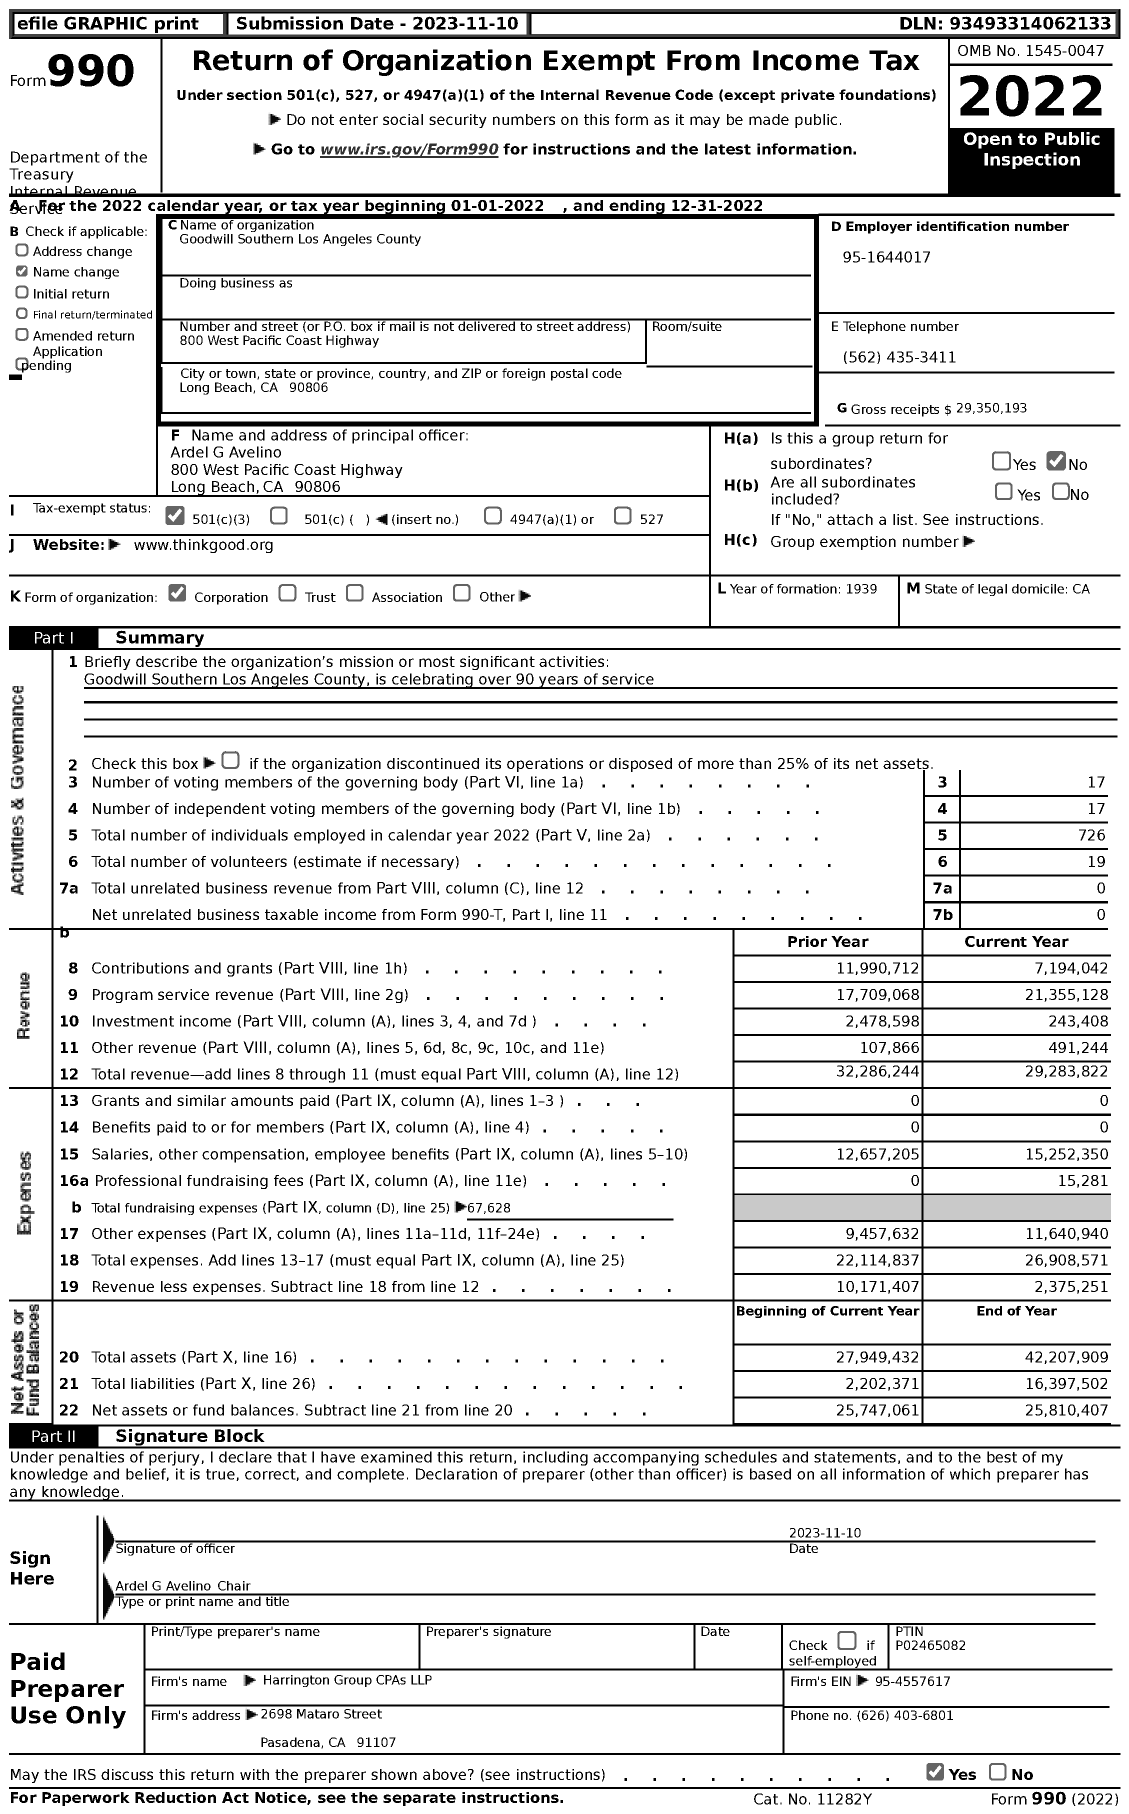 Image of first page of 2022 Form 990 for Goodwill Southern Los Angeles County (Goodwill SOLAC)